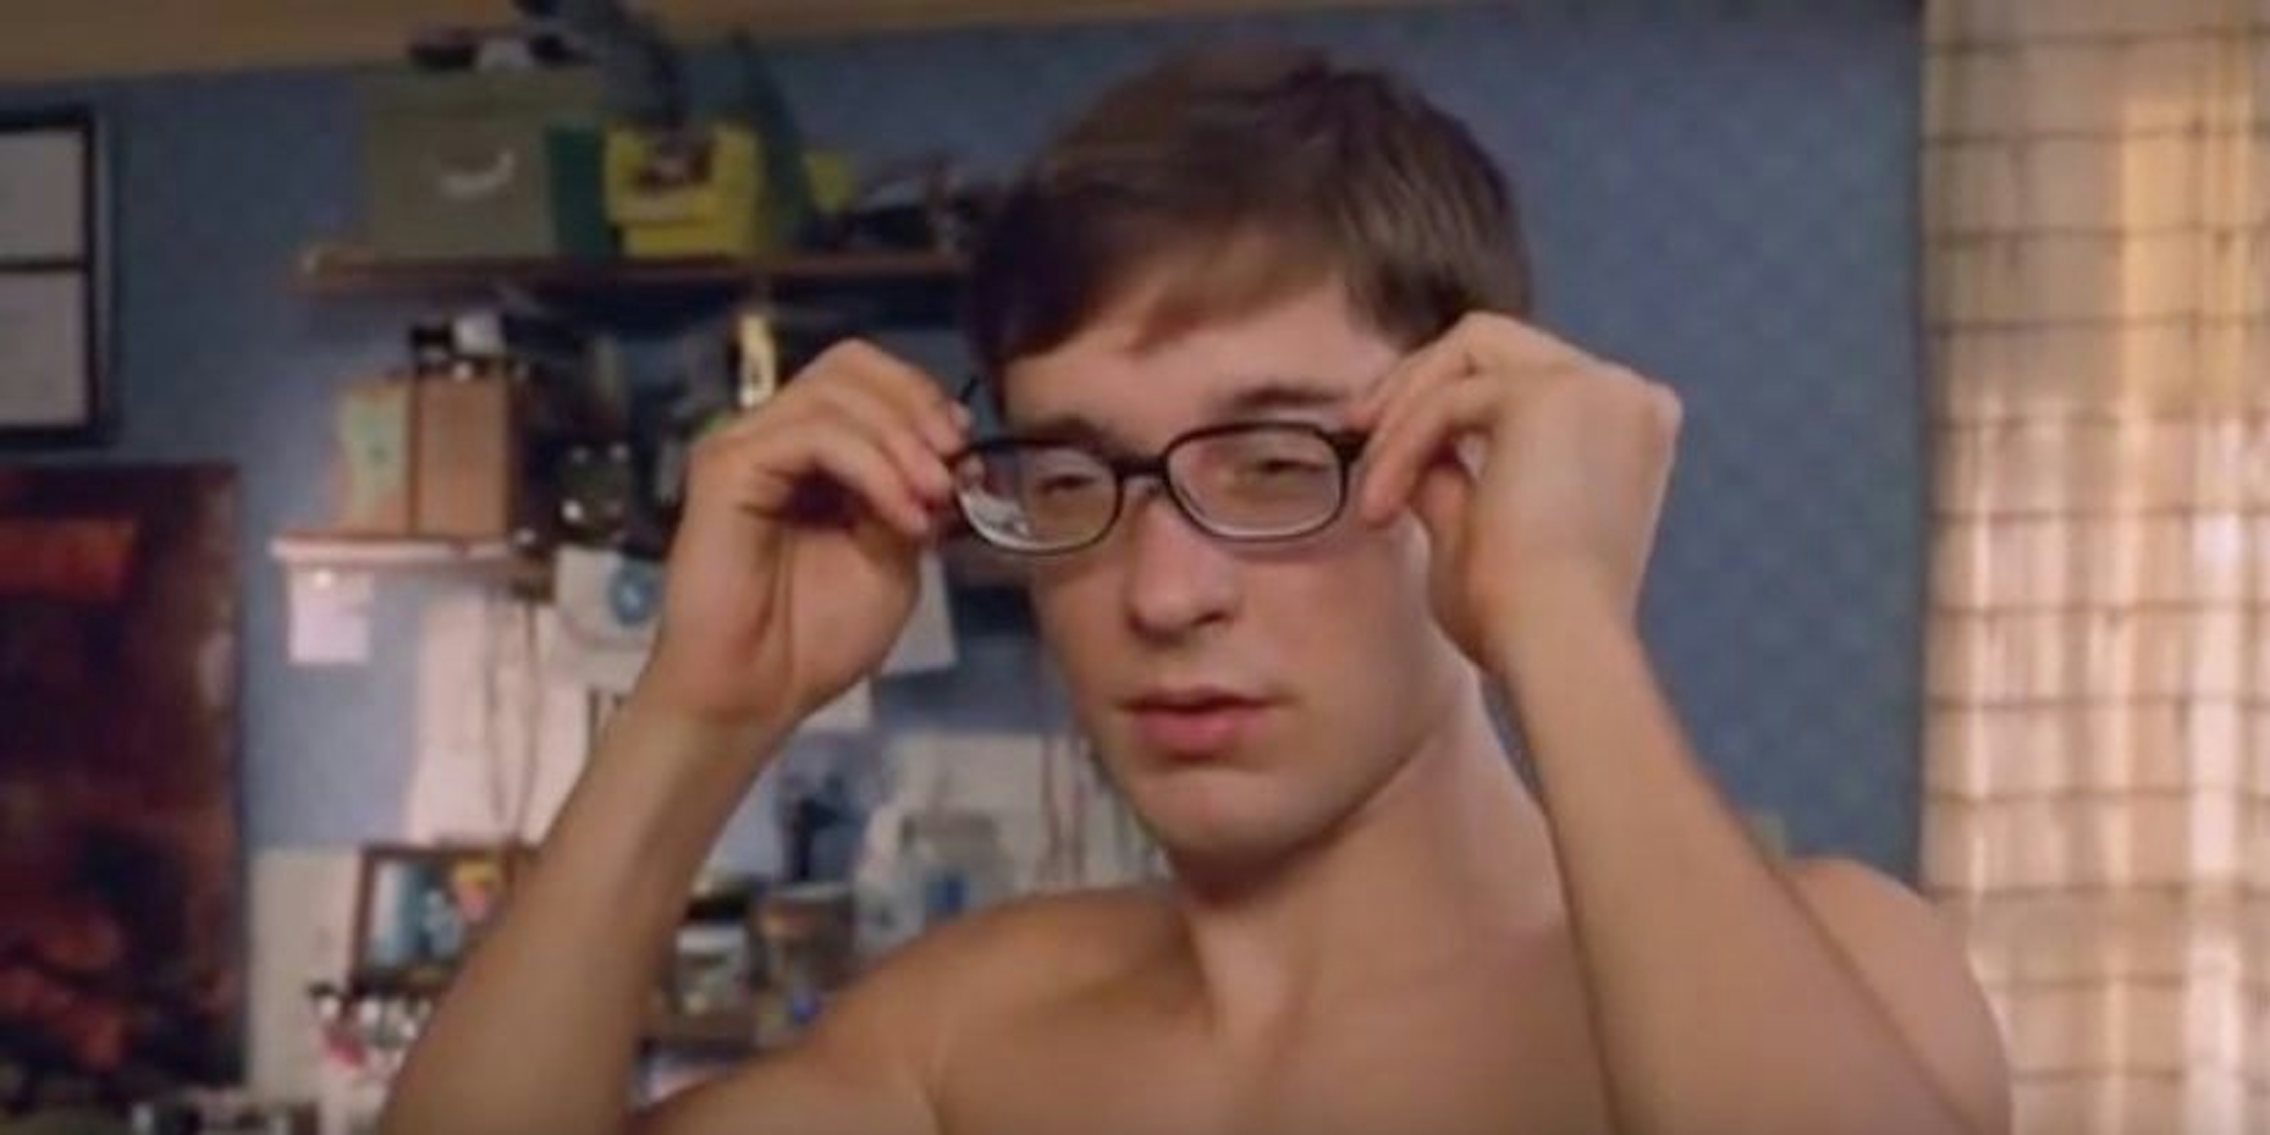 peter-parker-s-glasses-make-everything-clear-in-new-spider-man-meme